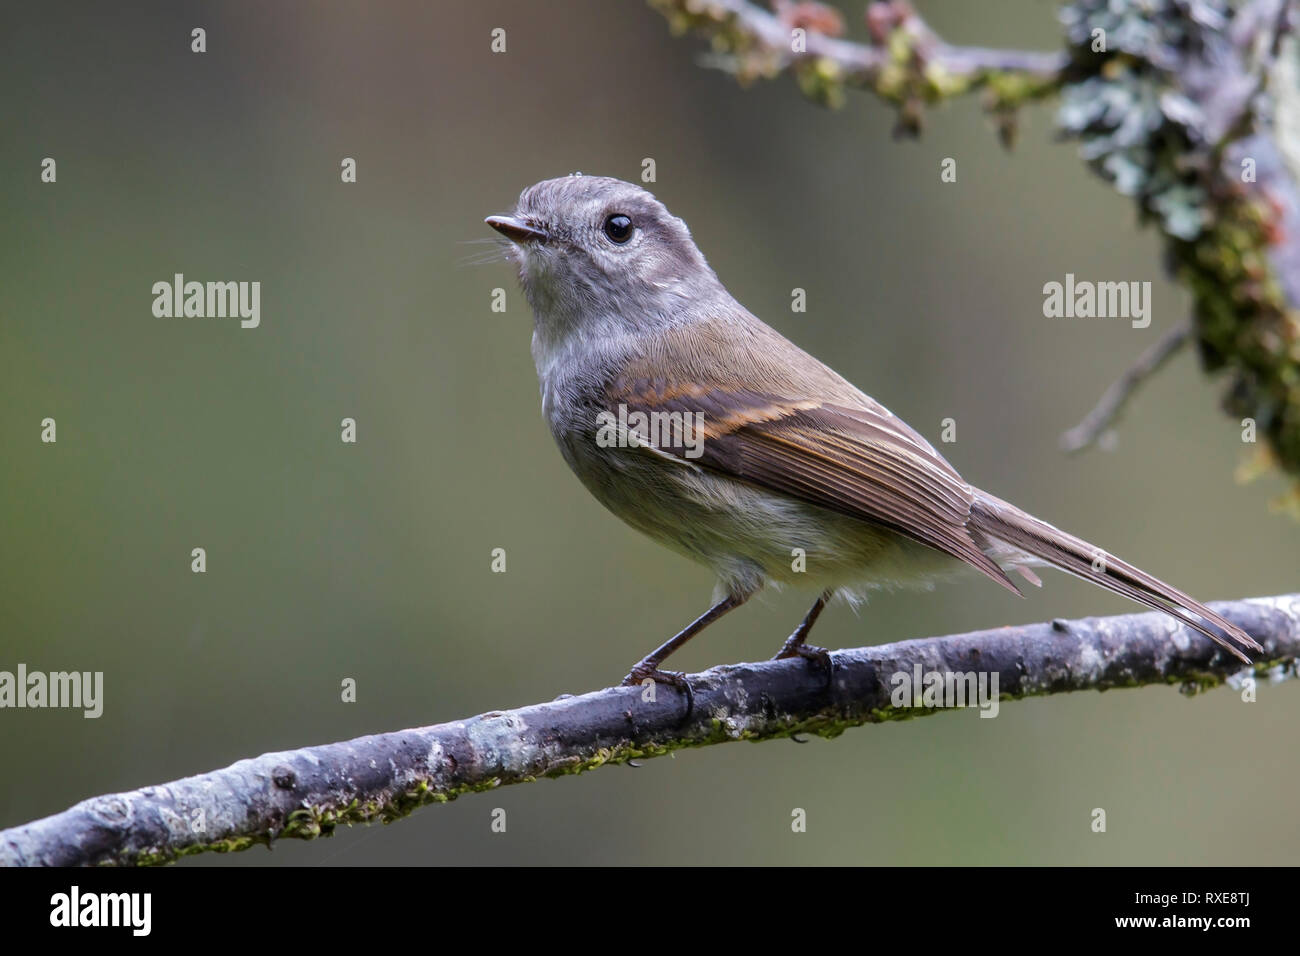 Patagonian Tyrant (Colorhamphus parvirostris) perched on a branch in Chile. Stock Photo